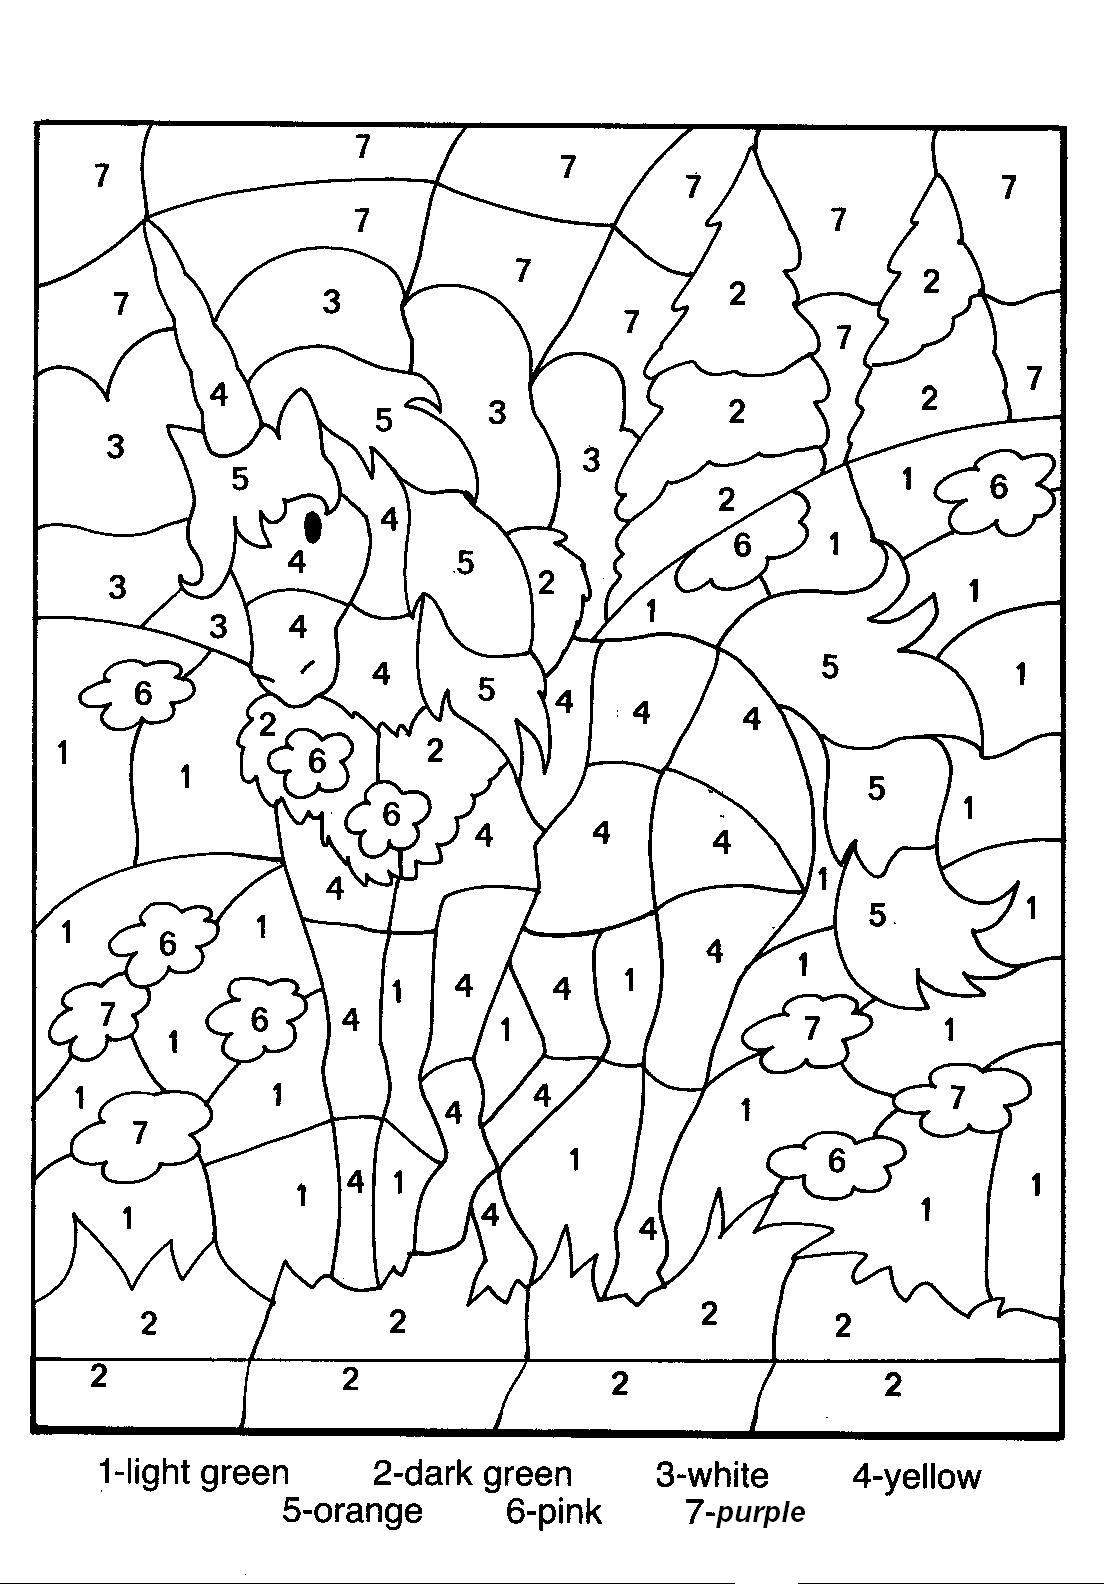 Coloring page: Coloring by numbers (Educational) #125508 - Printable coloring pages